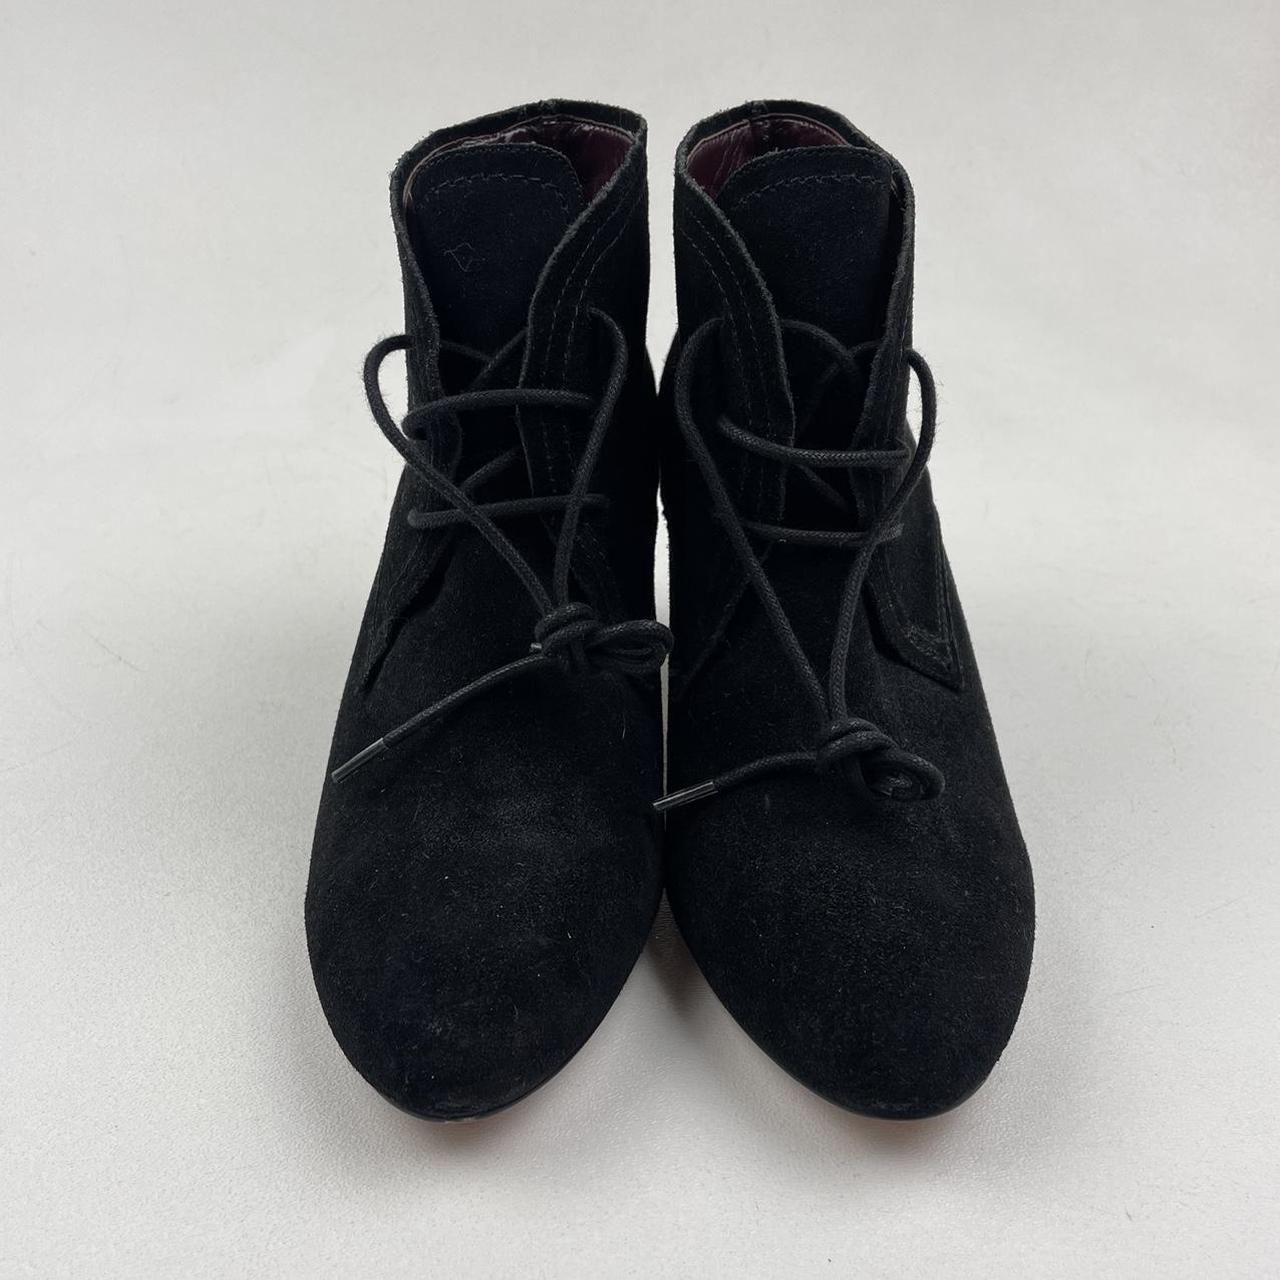 Product Image 2 - BCBGENERATION Suede Black Ankle Bootie